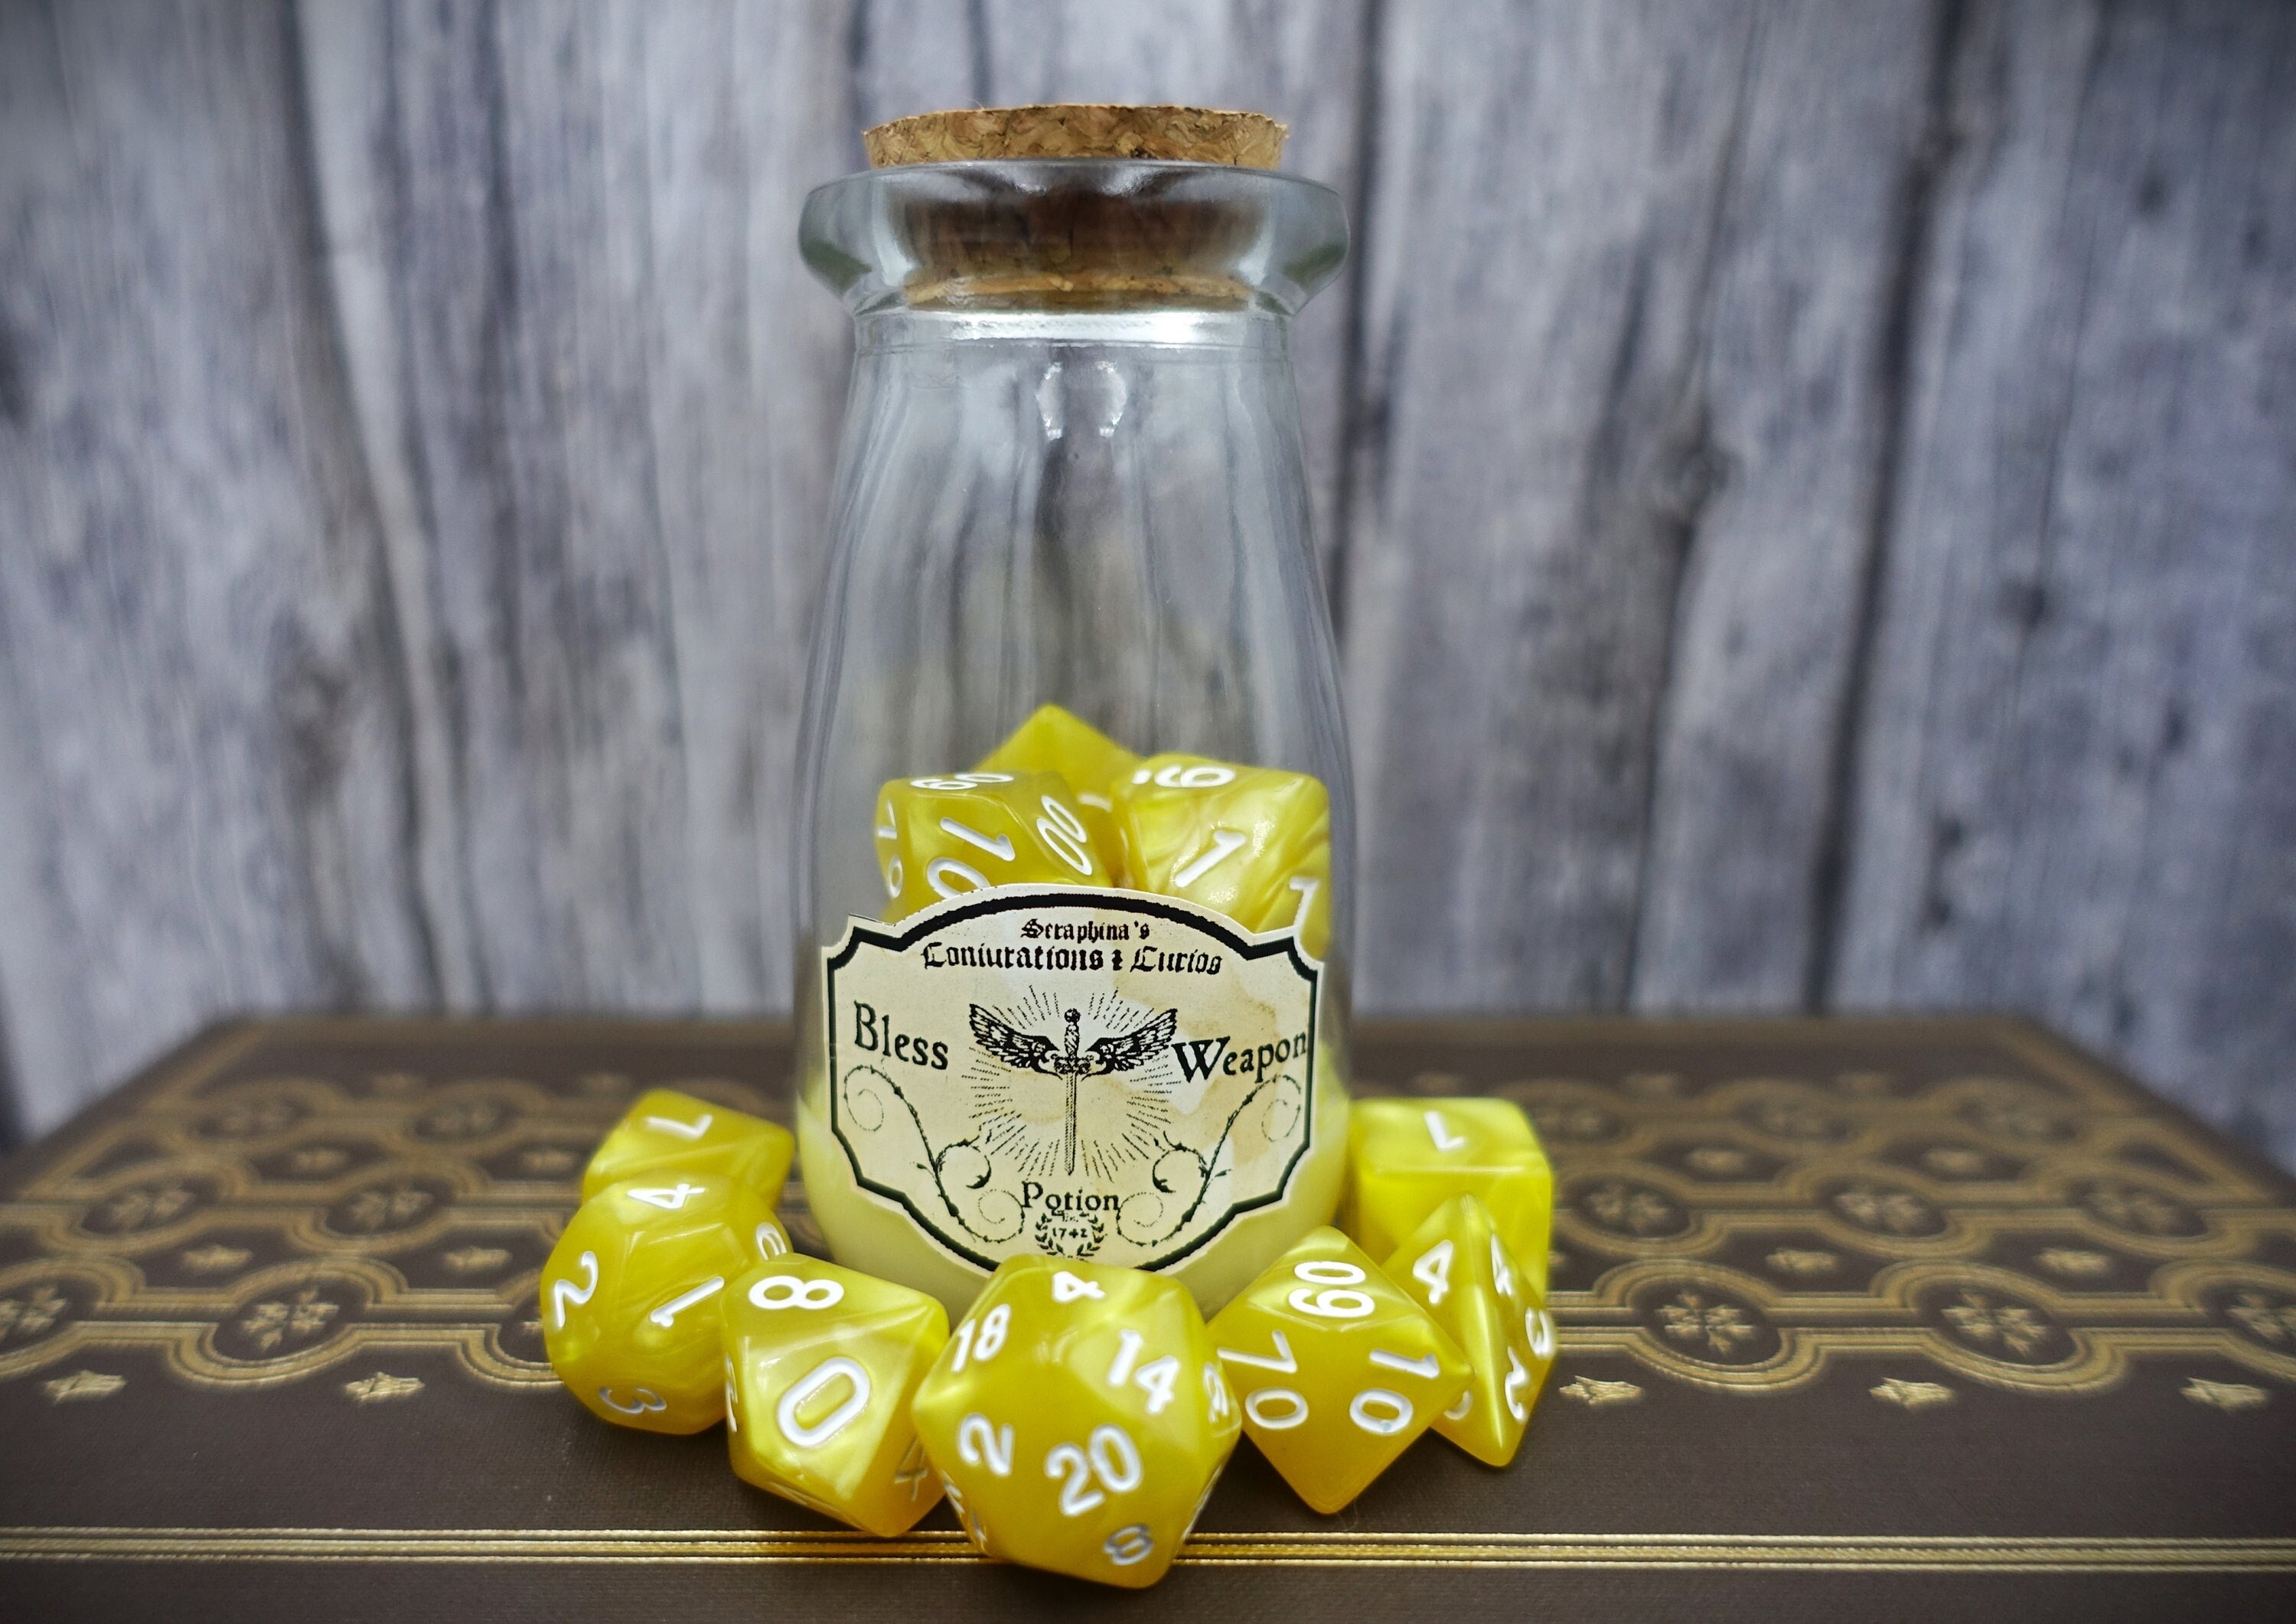 Bless weapon Dnd Potion bottle dice set Yellow and white